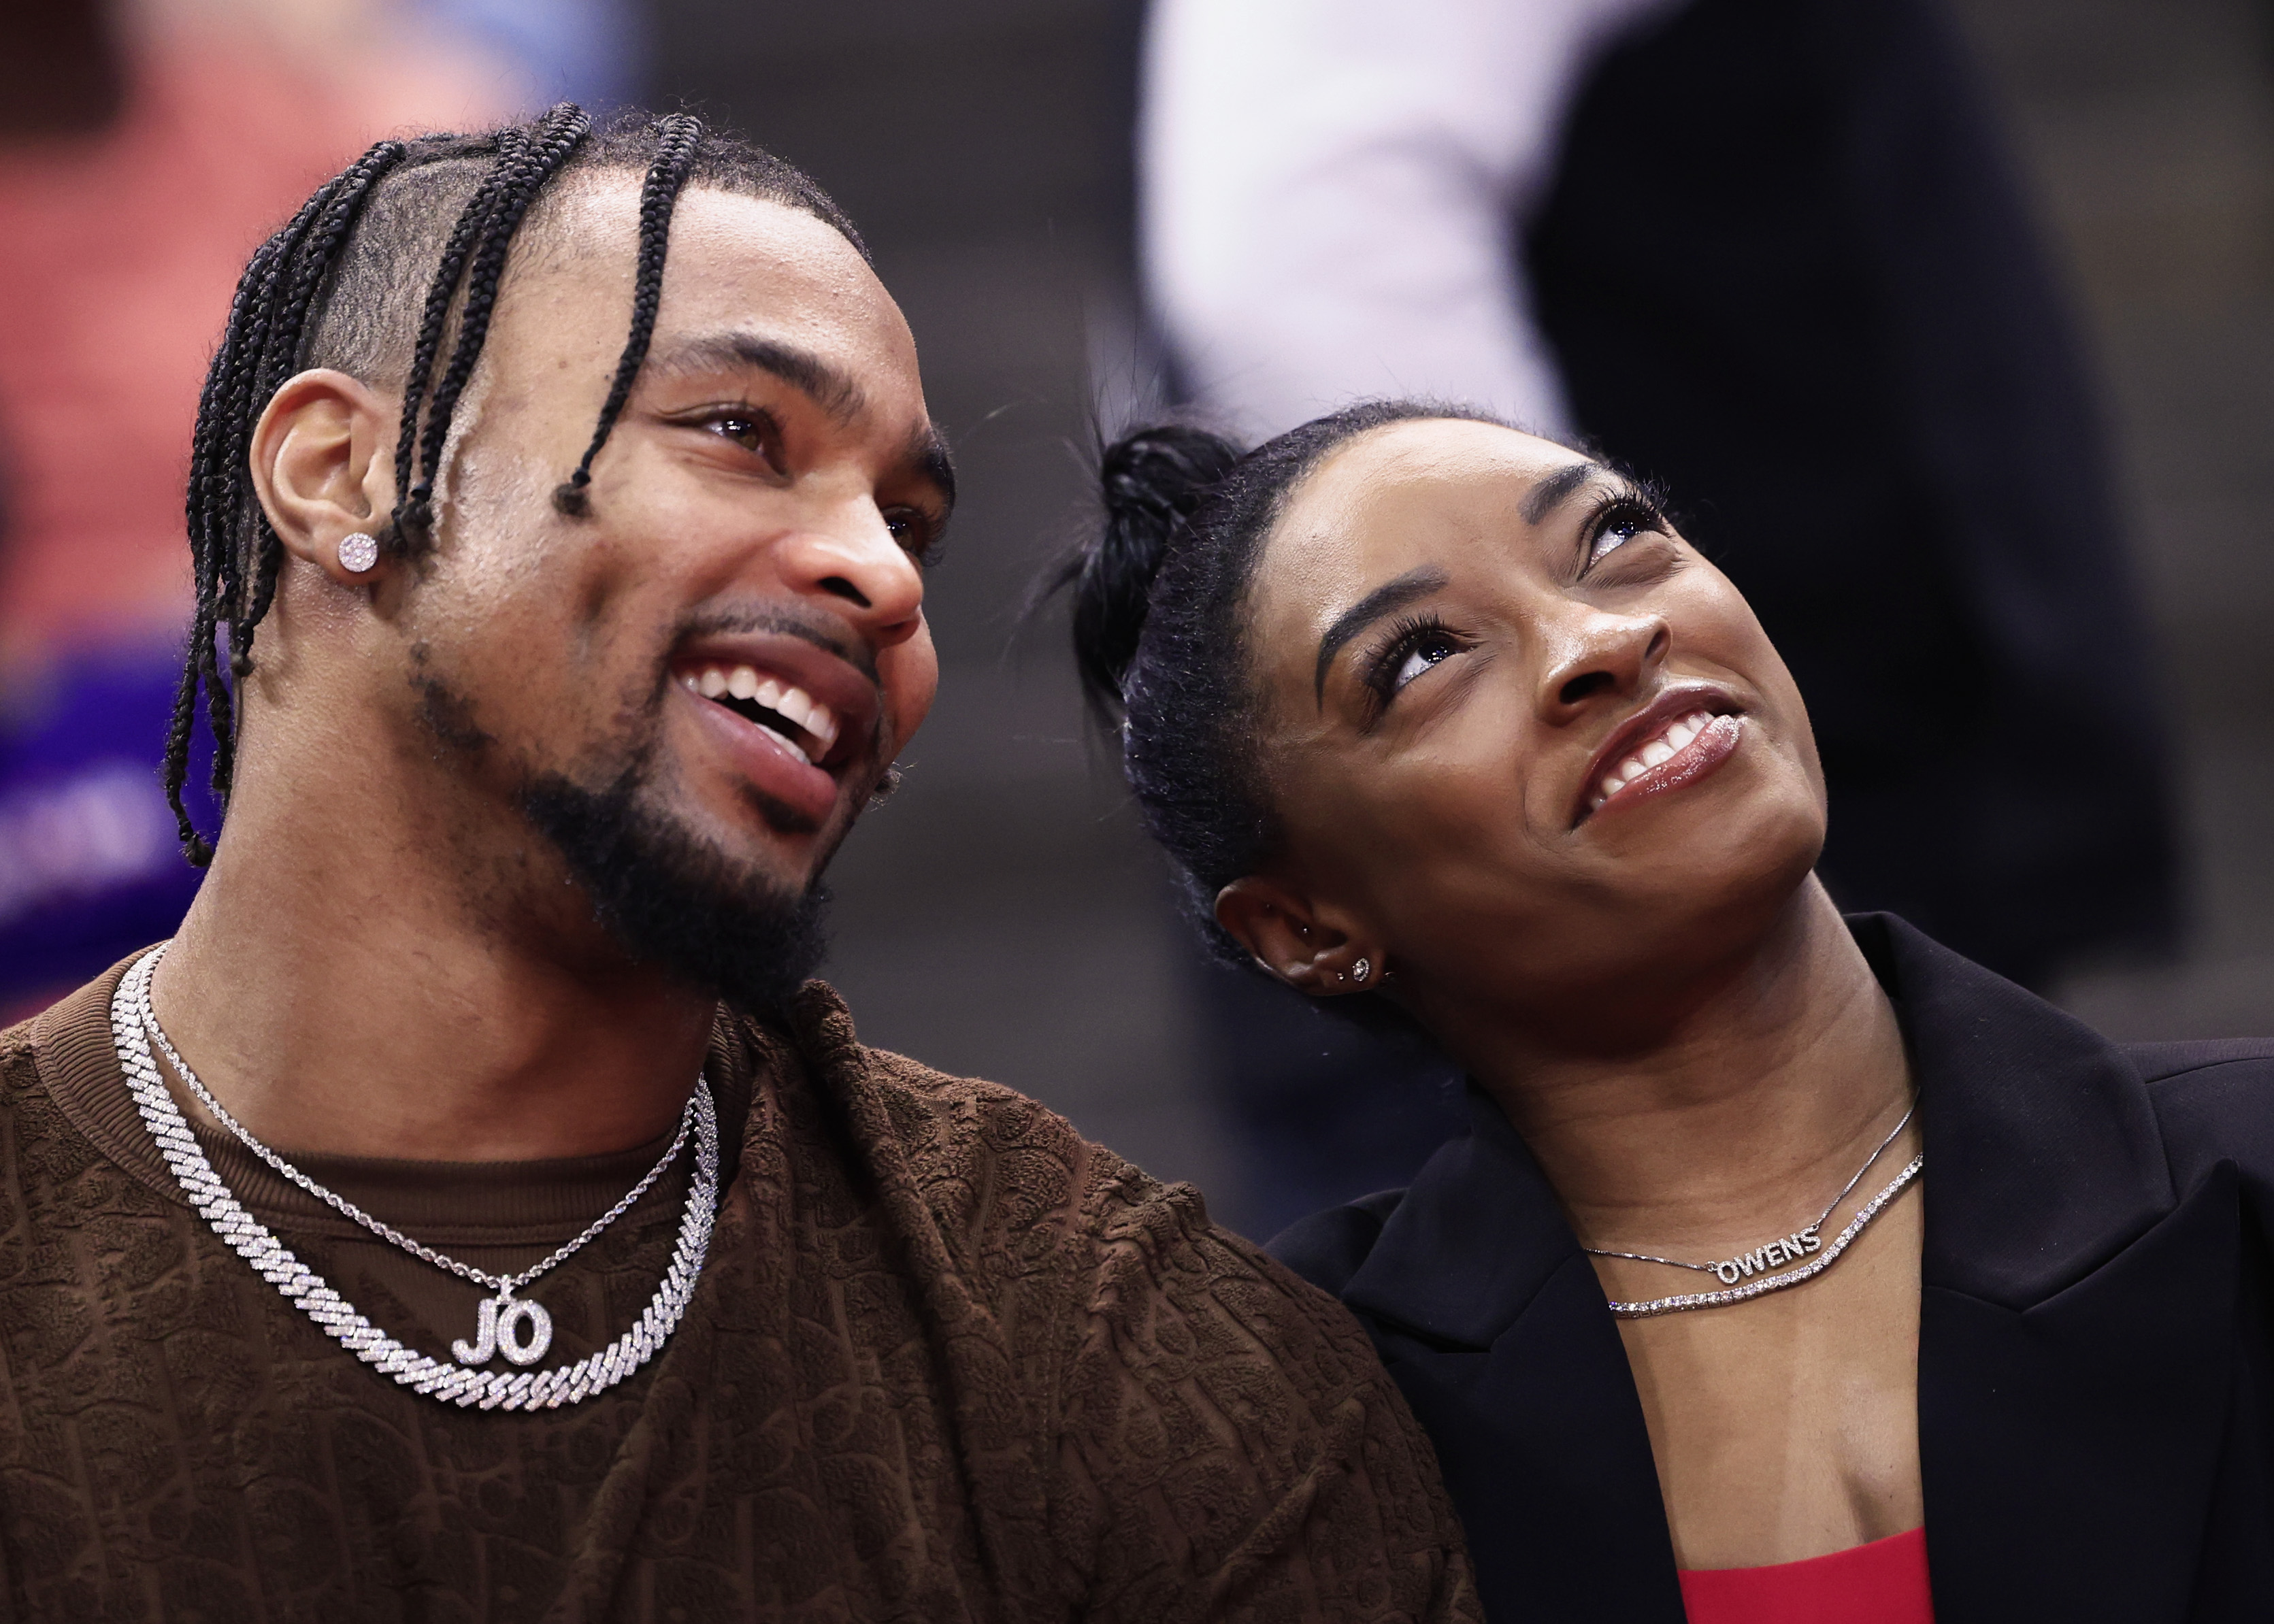 Simone Biles' husband Jonathan Owens negotiated NFL contract to attend 2024 Paris Olympics